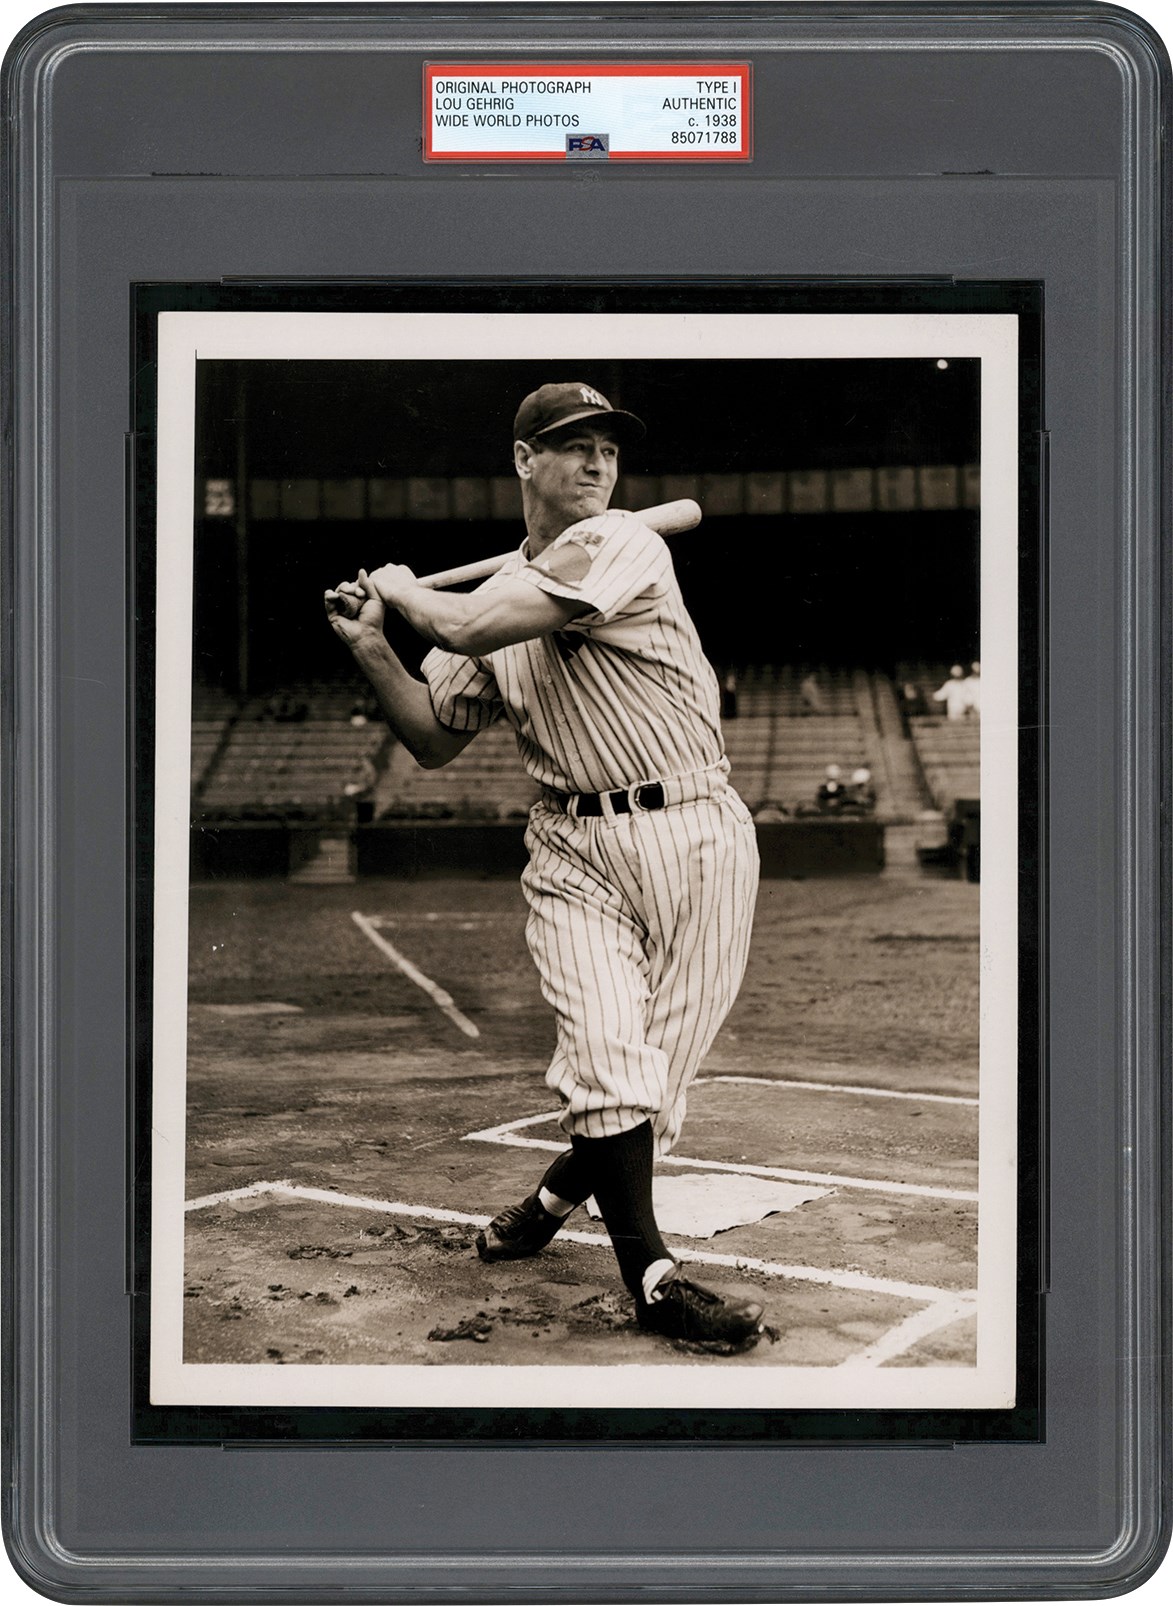 1938 Lou Gehrig Original Photograph Used for 1949 The Pride of the Yankees Comic Book Cover (PSA Type I)